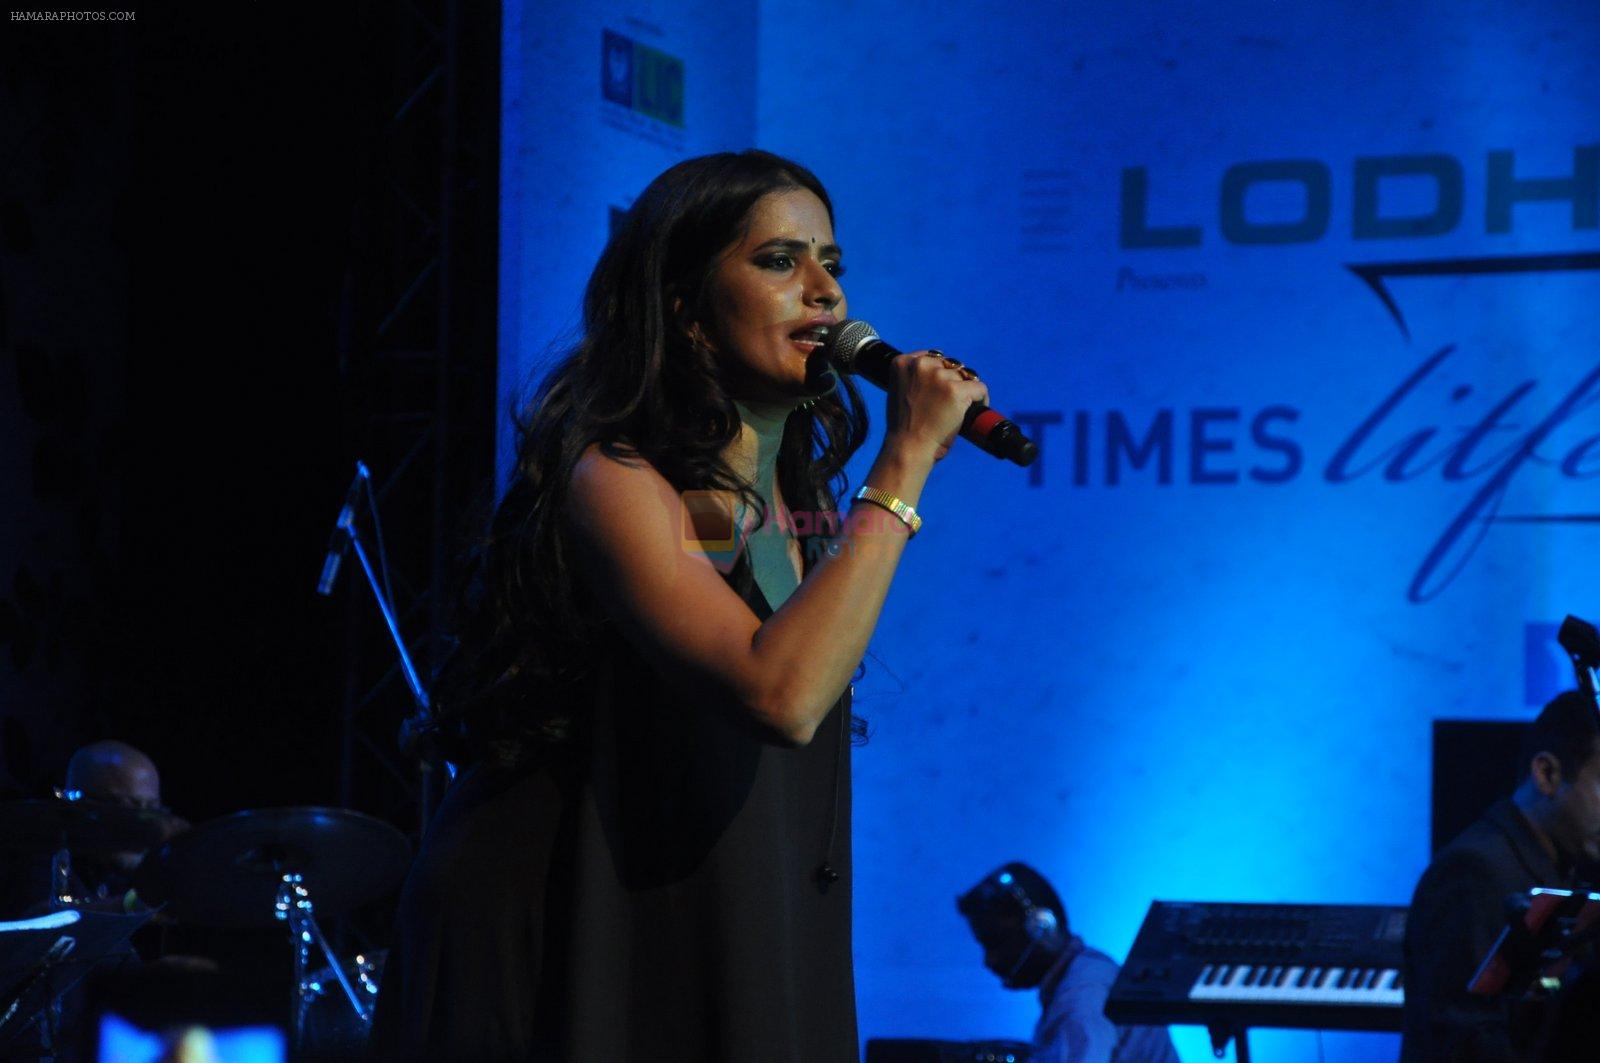 Sona Mohapatra perform at Times Lit Fest on 7th Dec 2014